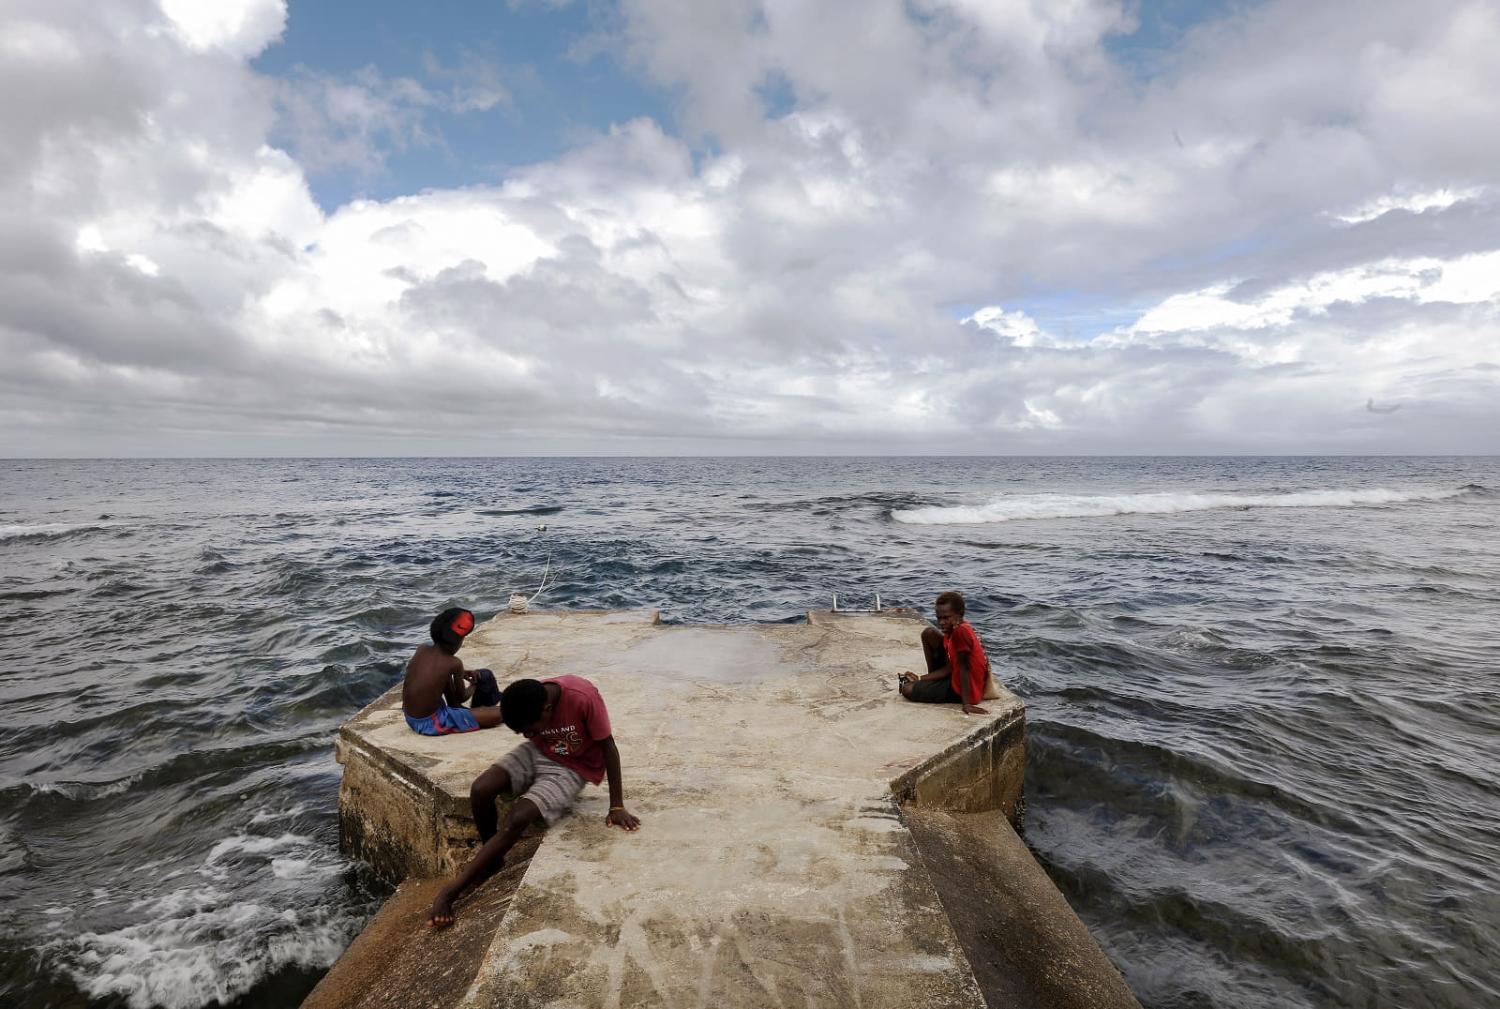 Satellite data show sea level has risen about 6mm per year around Vanuatu since 1993, a rate nearly twice the global average (Mario Tama/Getty Images)